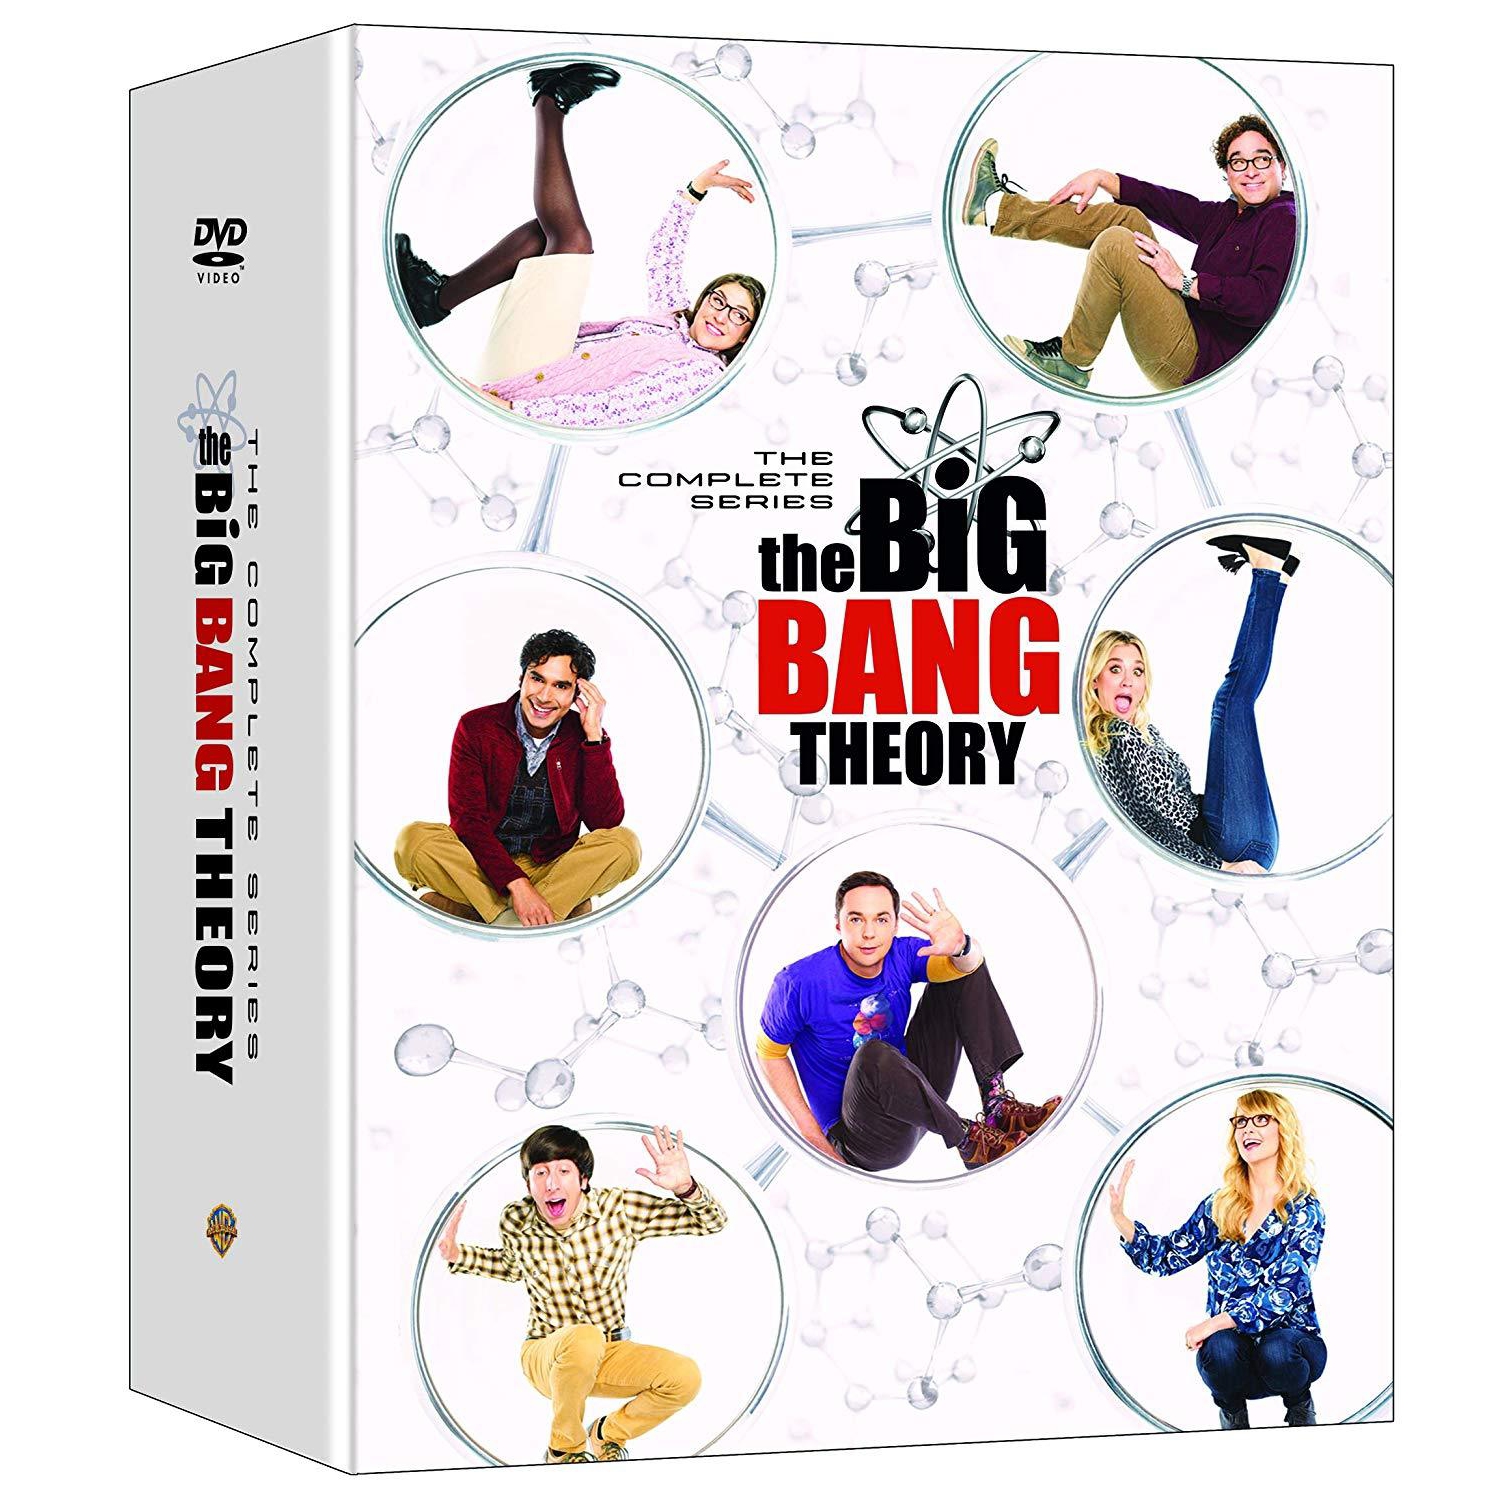 The Big Bang Theory: The Complete Series (English only)